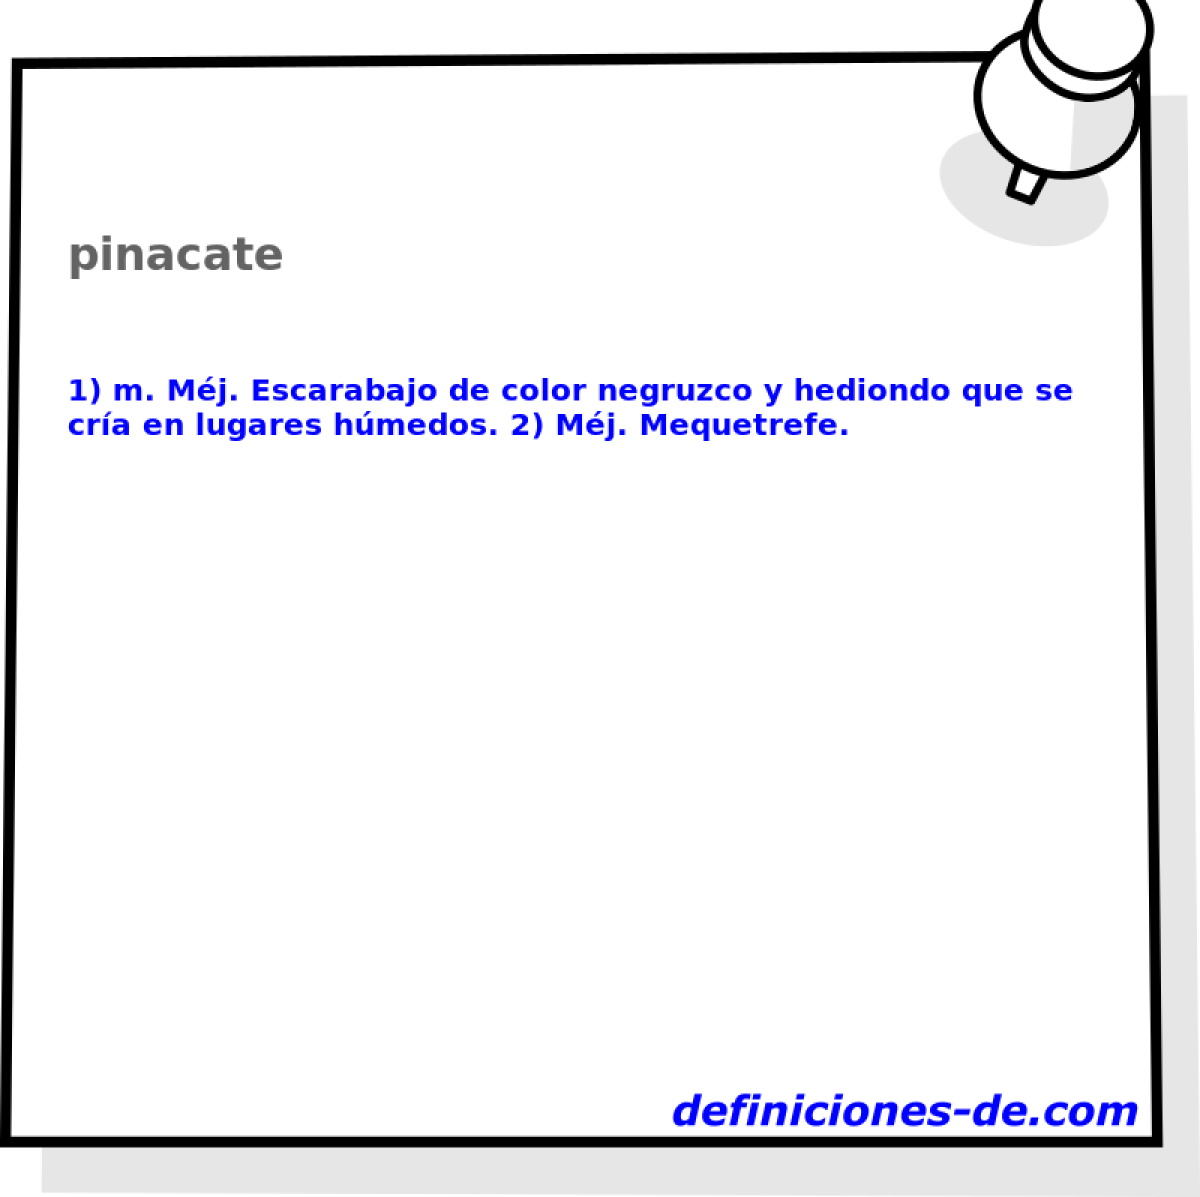 pinacate 